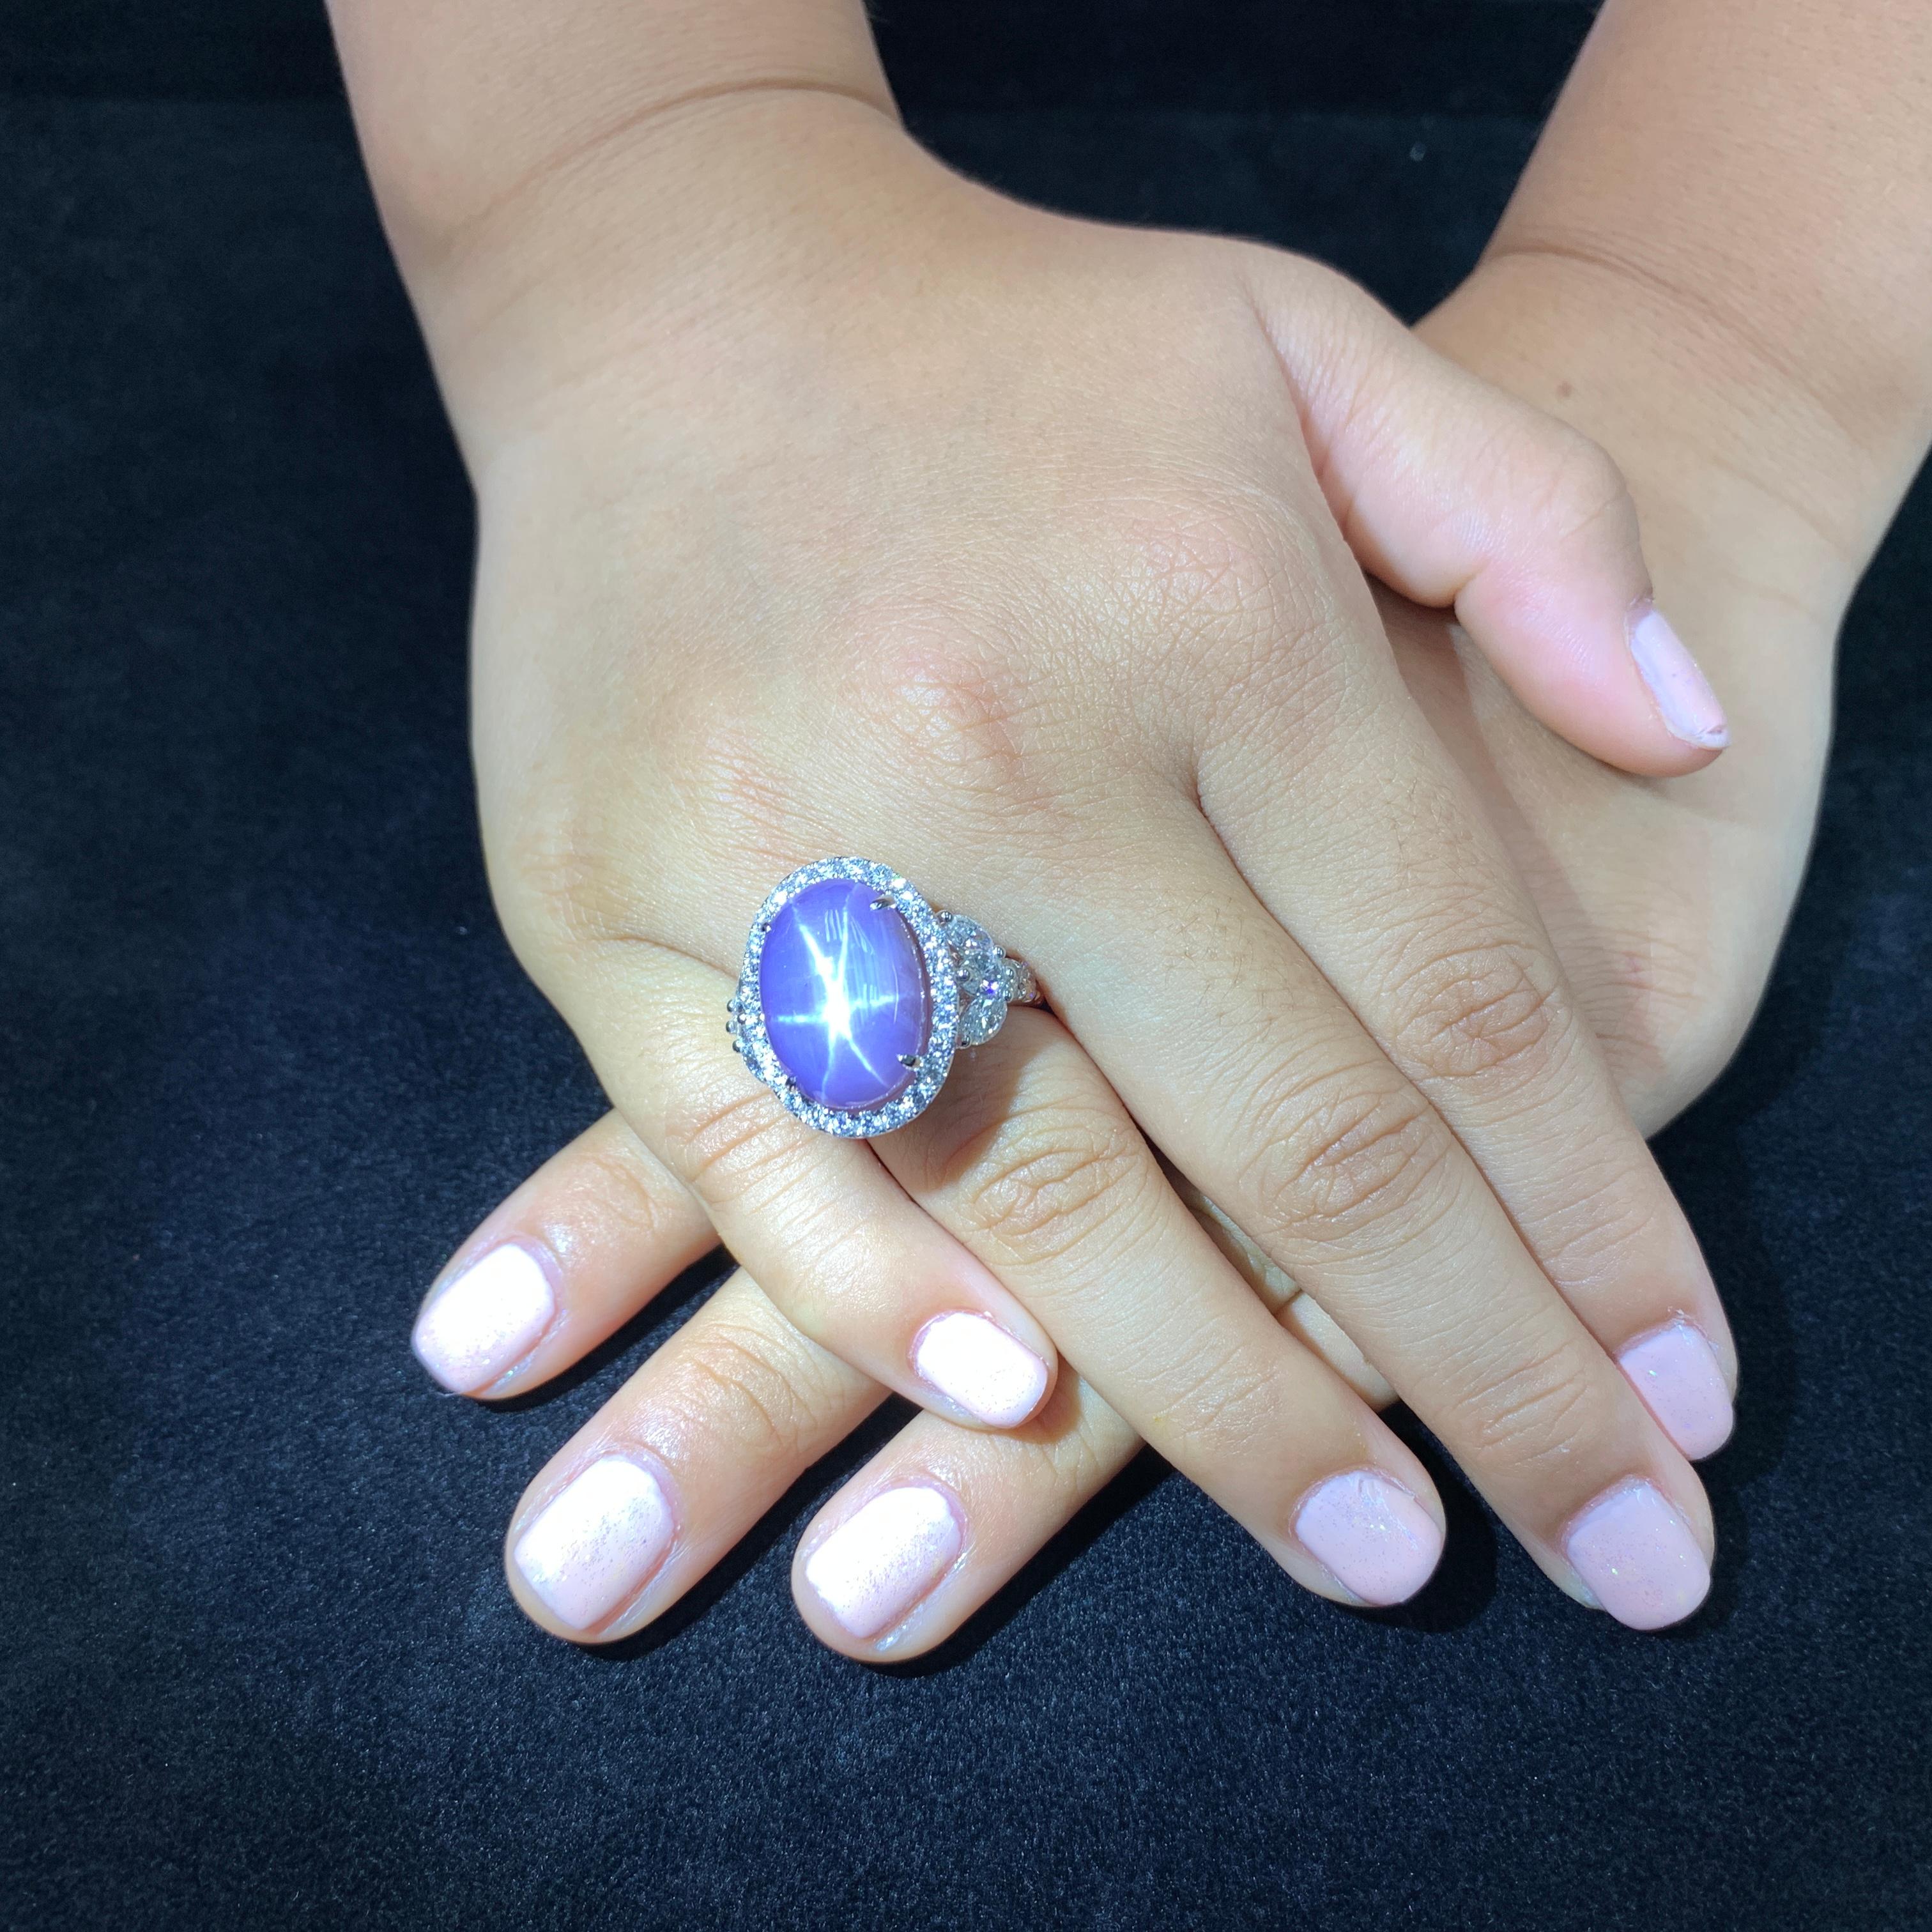 ASK FOR A VIDEO! Super strong star! A statement piece for sure. Here is a certified natural purple star Sapphire and diamond ring. The ring is set in 18k white gold and diamonds. There are combinations of Marquis and round diamonds that make up this